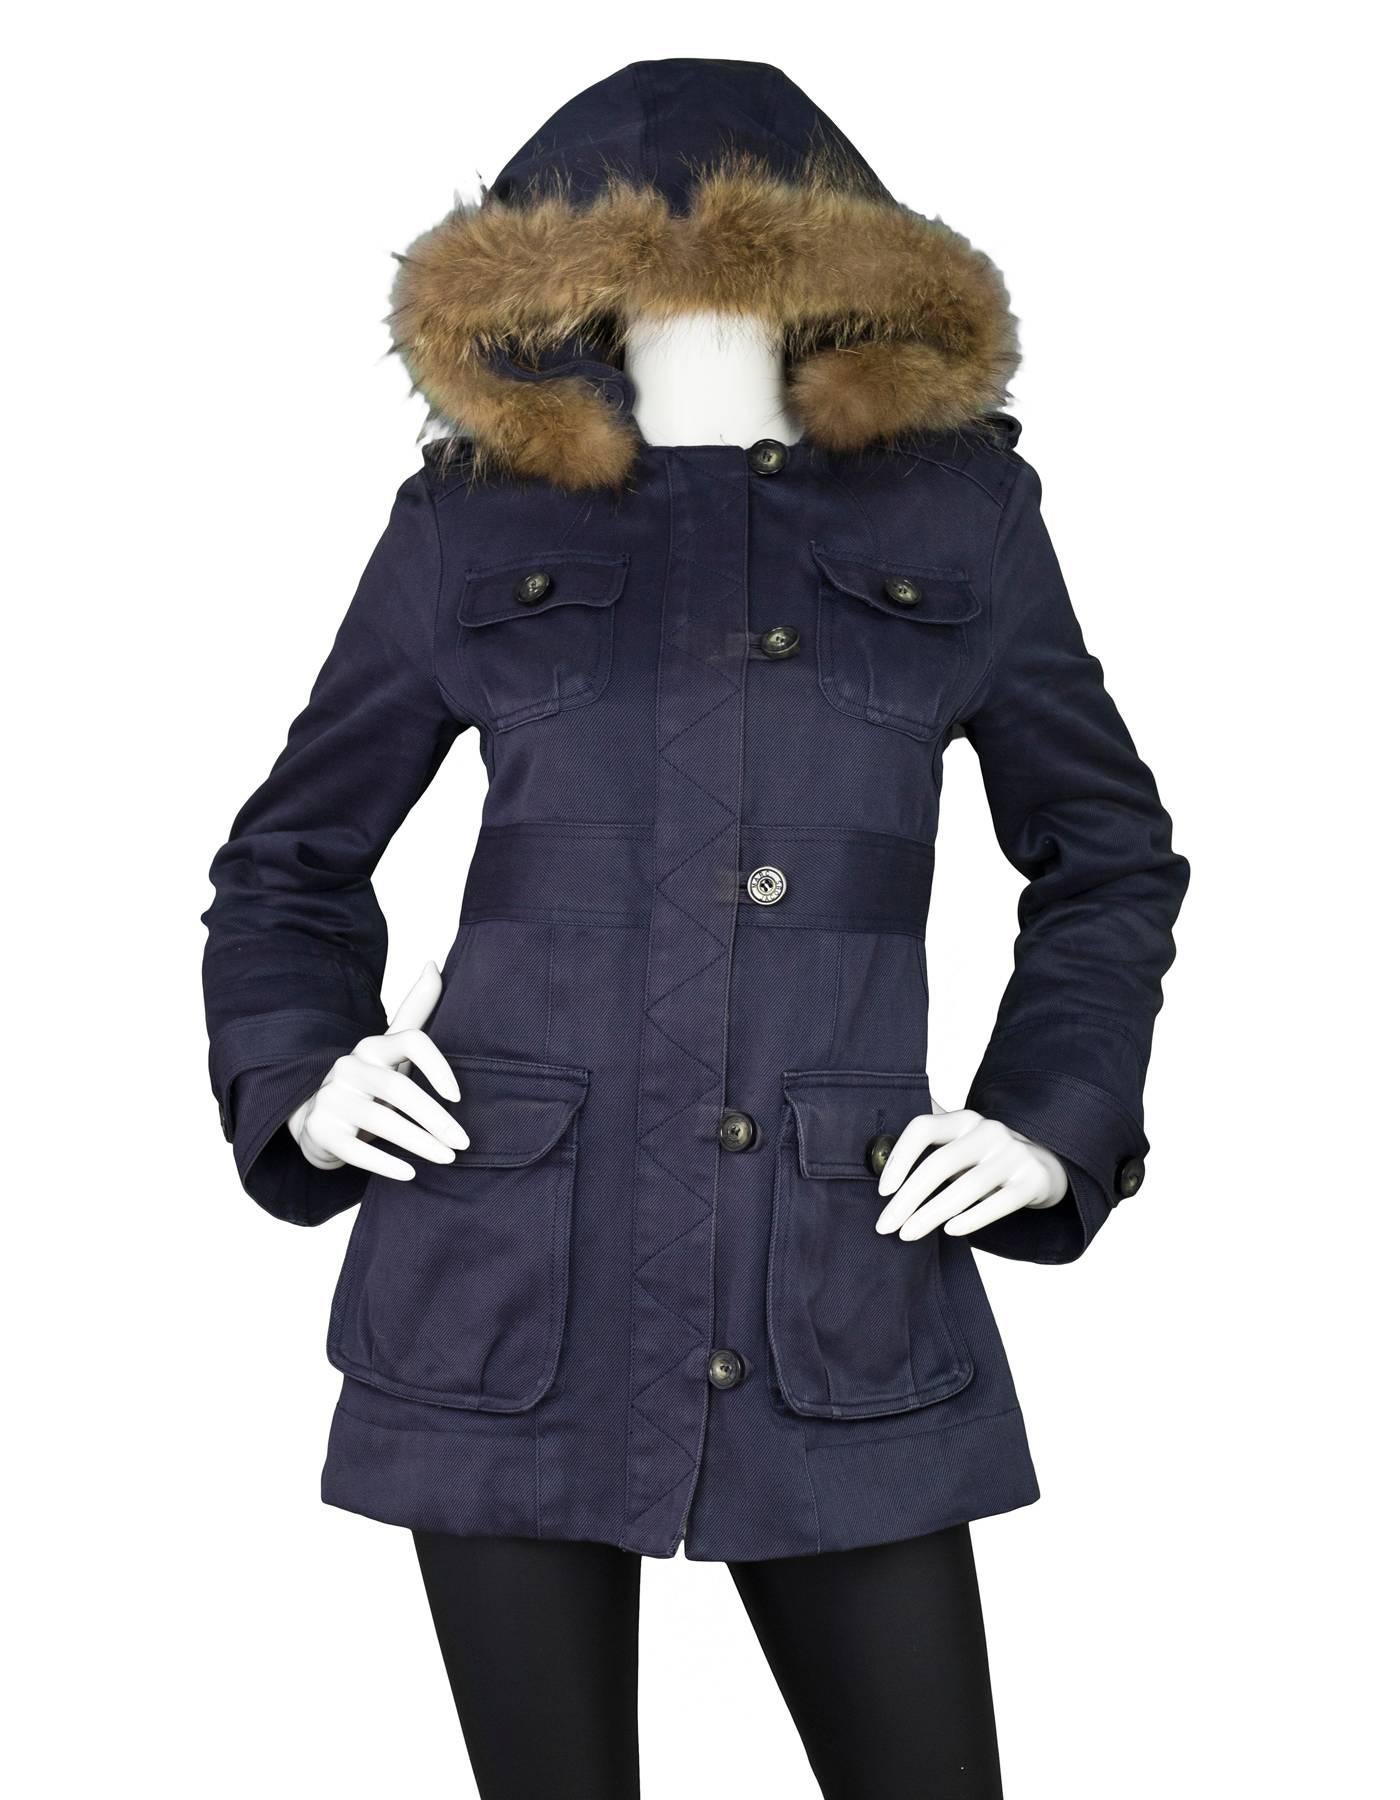 Marc by Marc Jacobs Purple Parka Hooded Coat Sz S

Made In: Poland
Color: Purple
Composition: 100% cotton
Lining: Brown textile
Closure/Opening: Zip up front and button cosure
Exterior Pockets: Side hip flap pockets and small pockets at bust
Overall